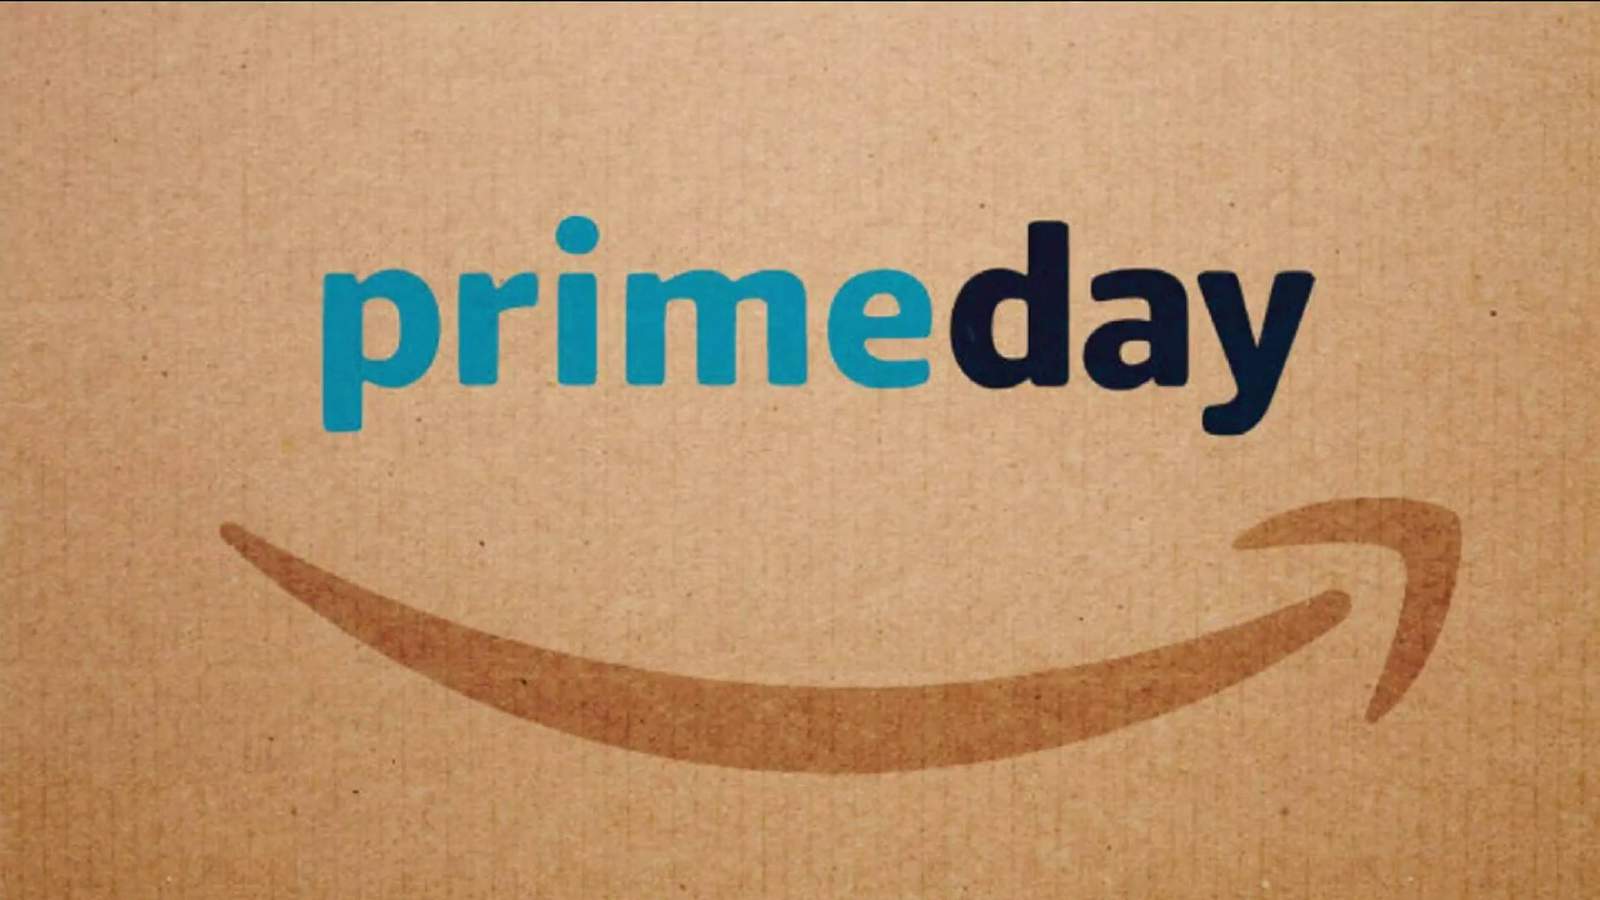 You’re not the only one trying to cash in on Prime Day deals